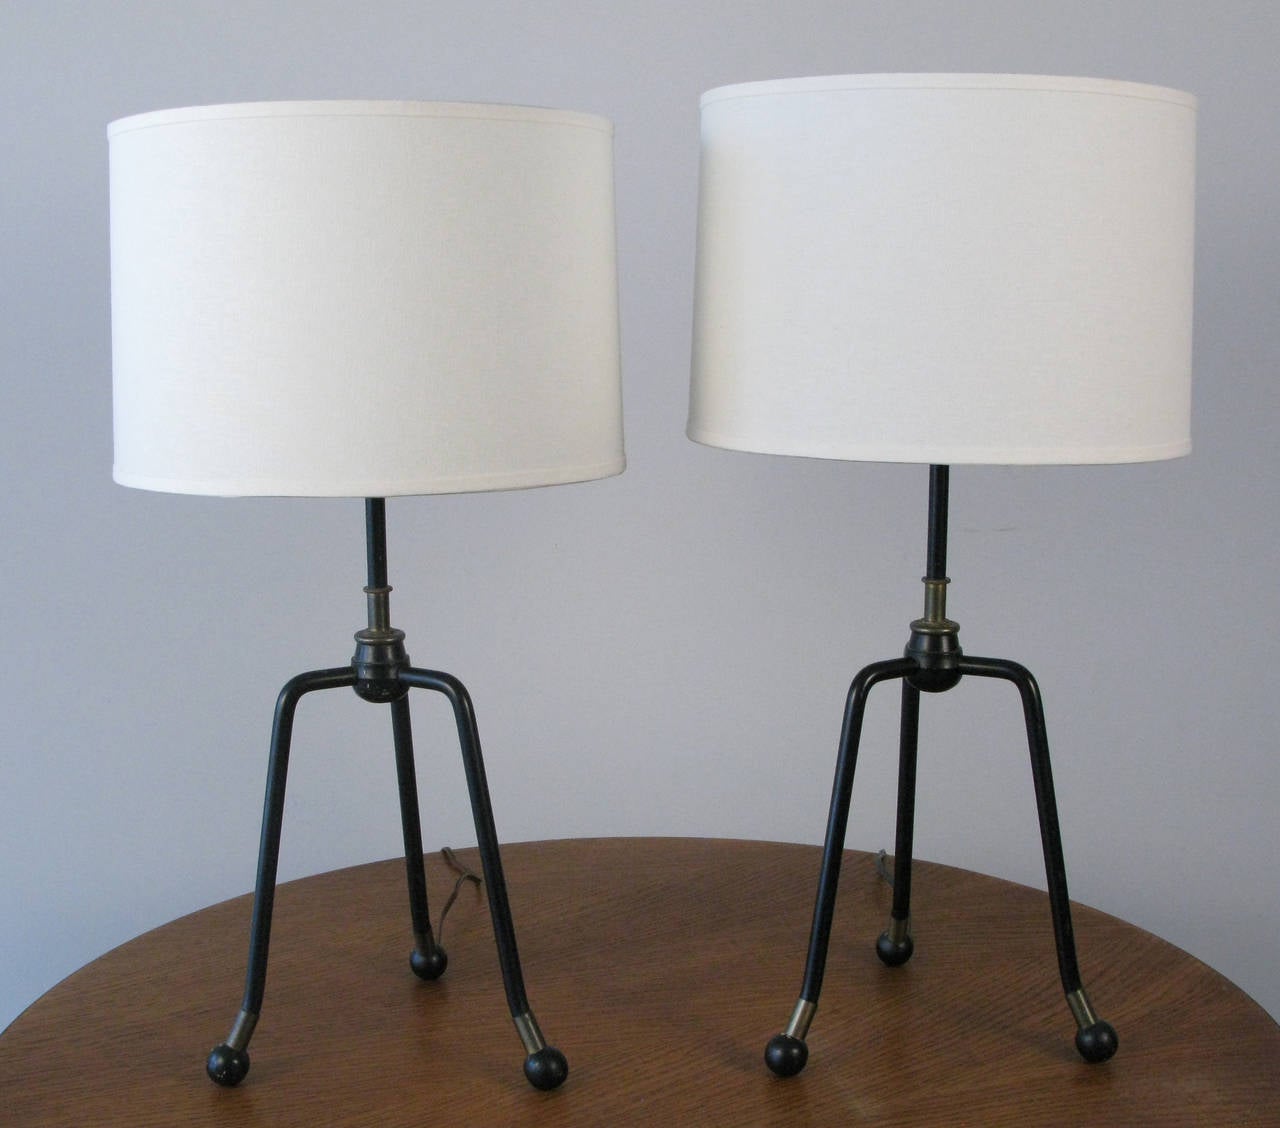 A good looking pair of Iron and brass table lamps. The lamps are both modern and industrial. they end in round wood ball feet.